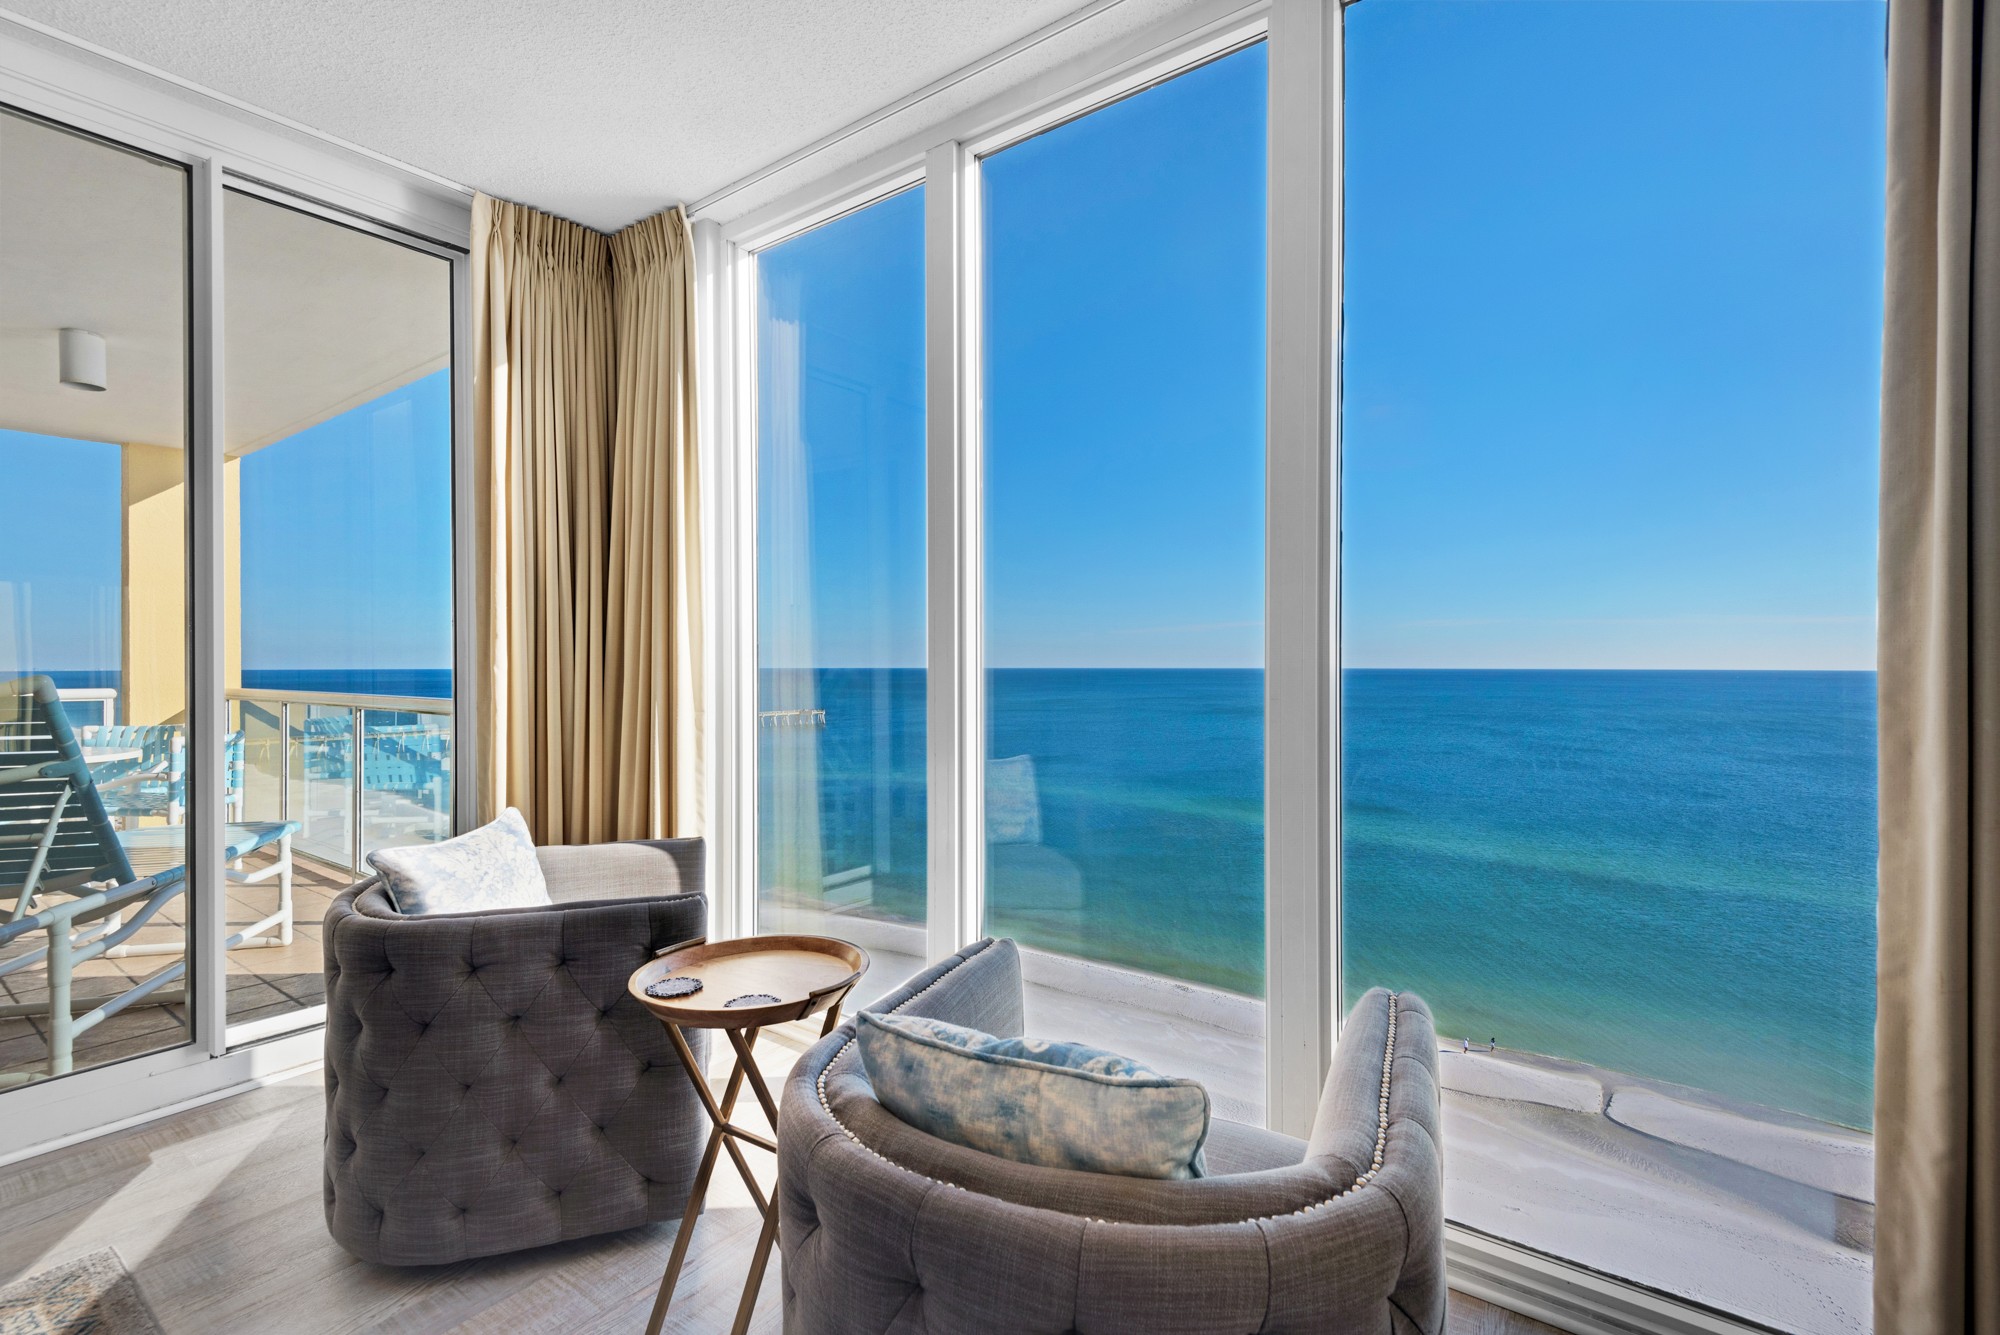 A Room w/ a View! Wake Up to Stunning Ocean Views in Your Beautiful New Master